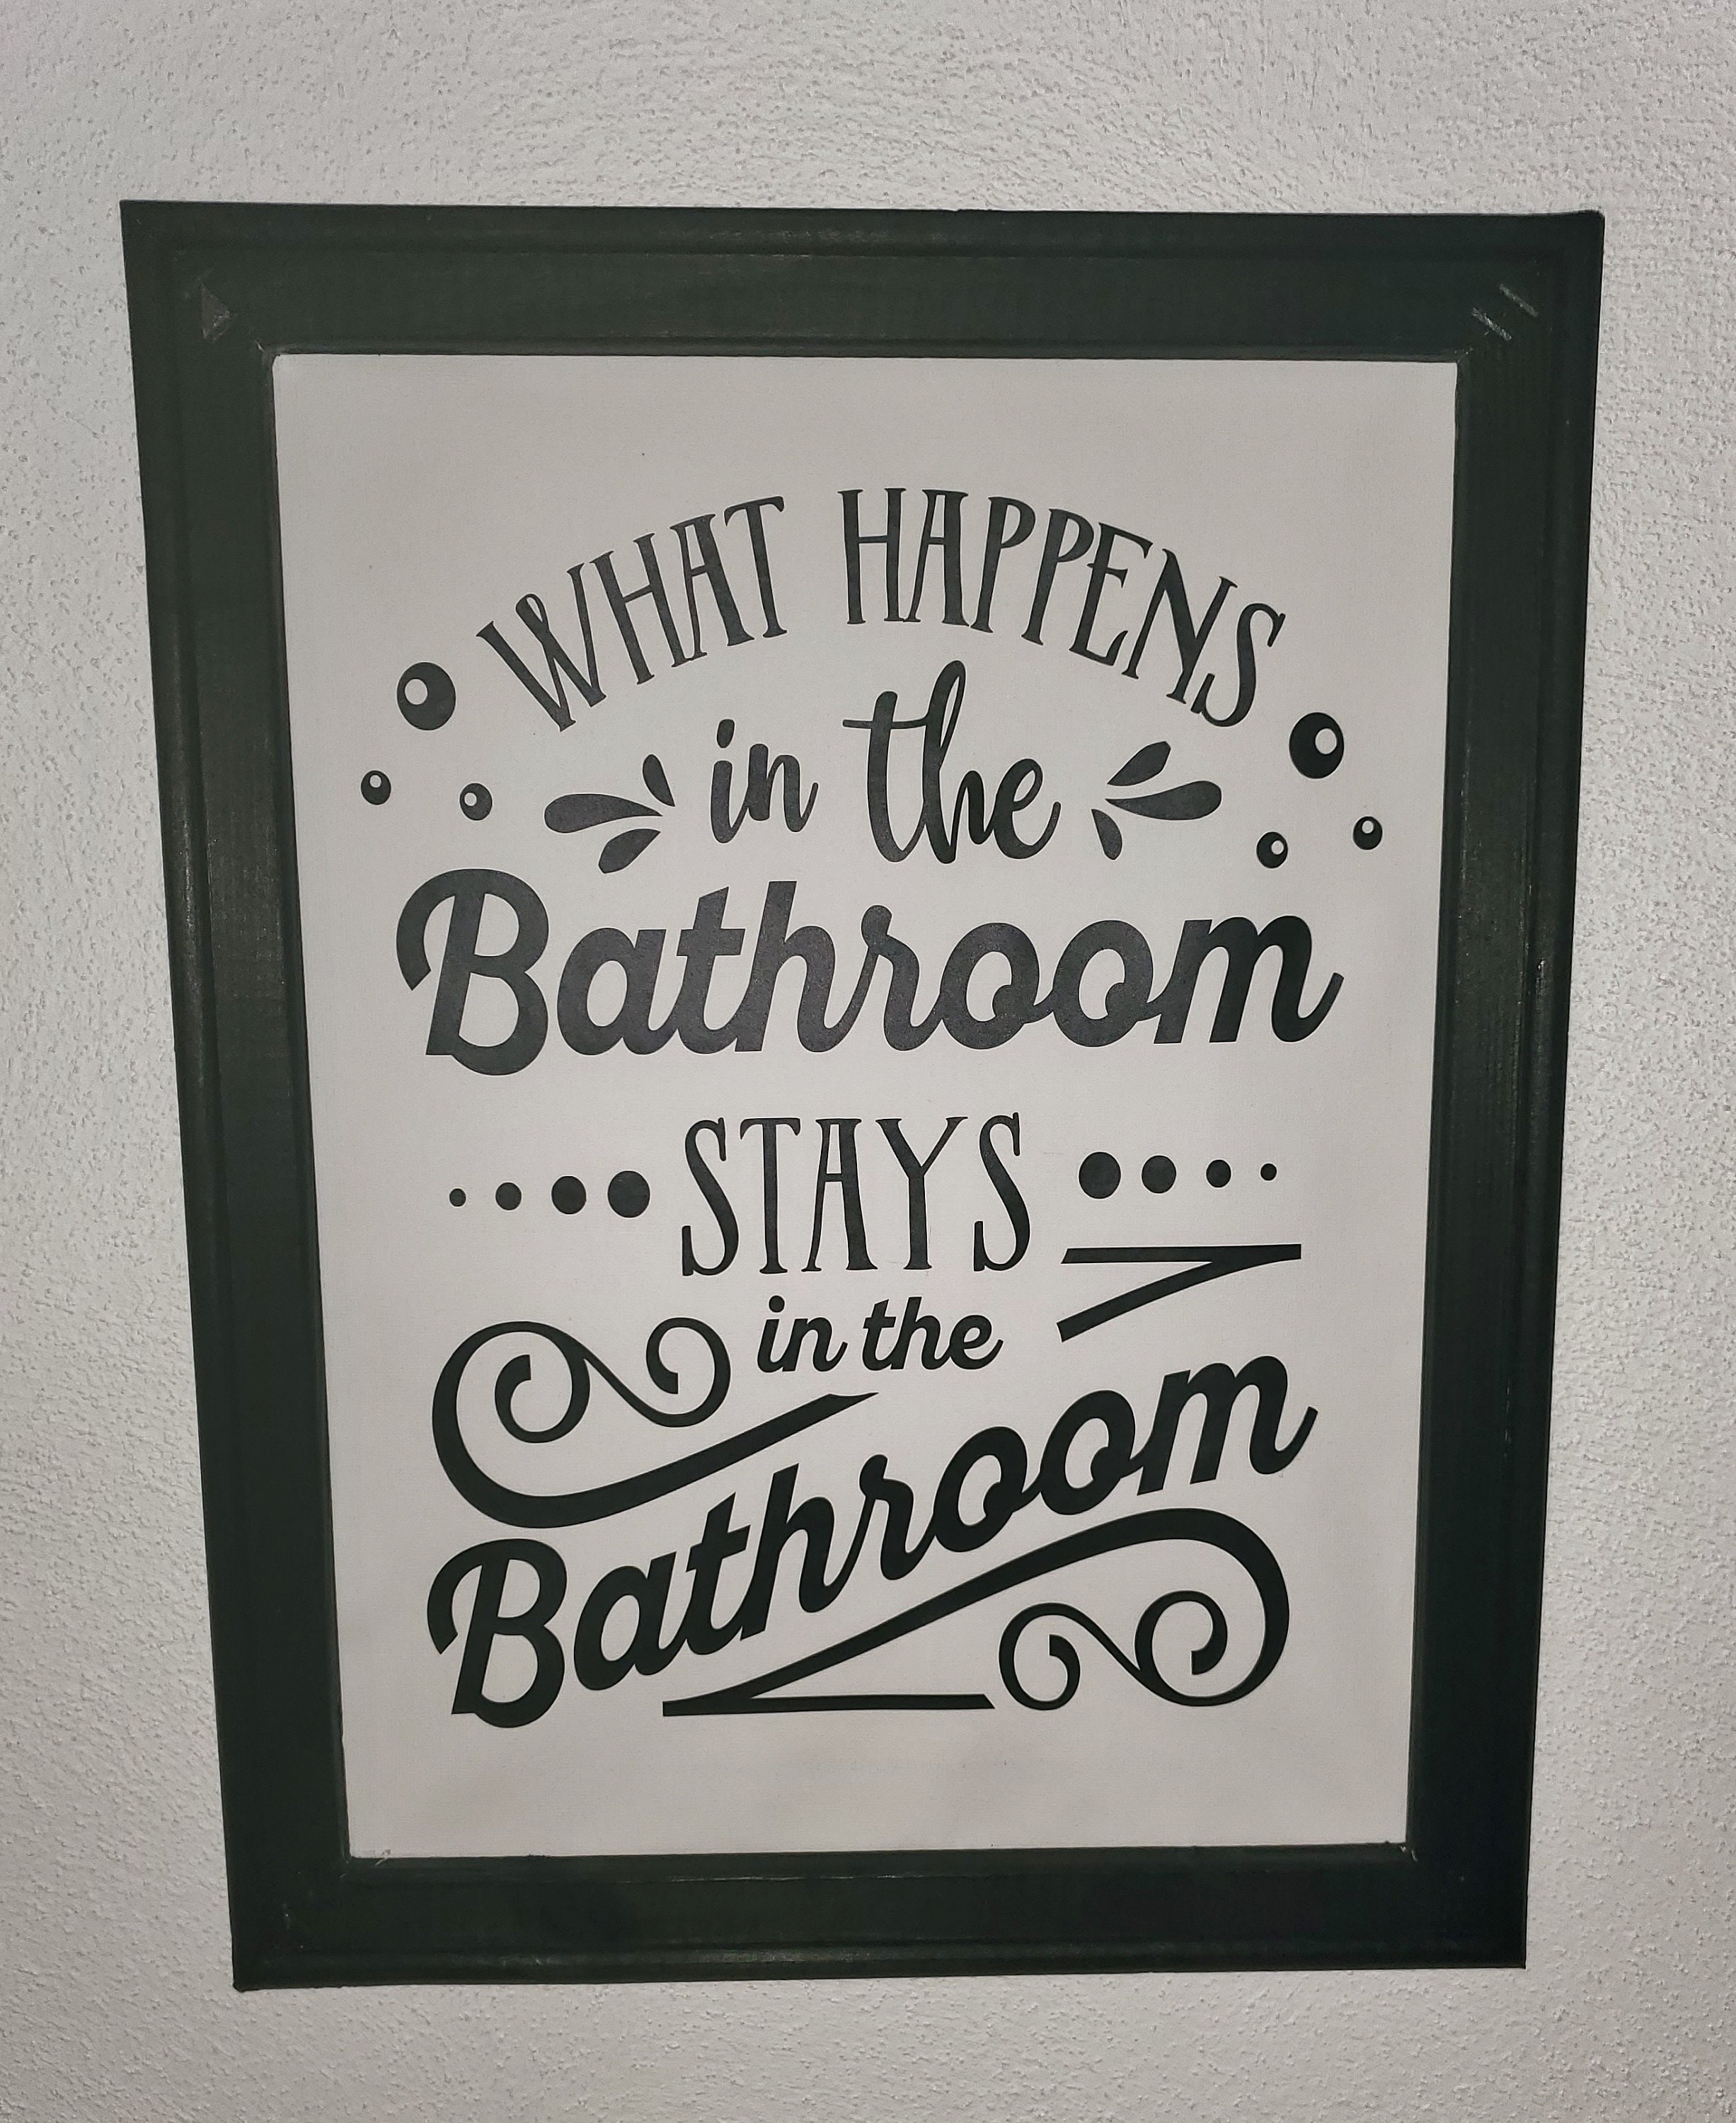 What Happens in the Bathroom Stays in the Bathroom sign | Etsy